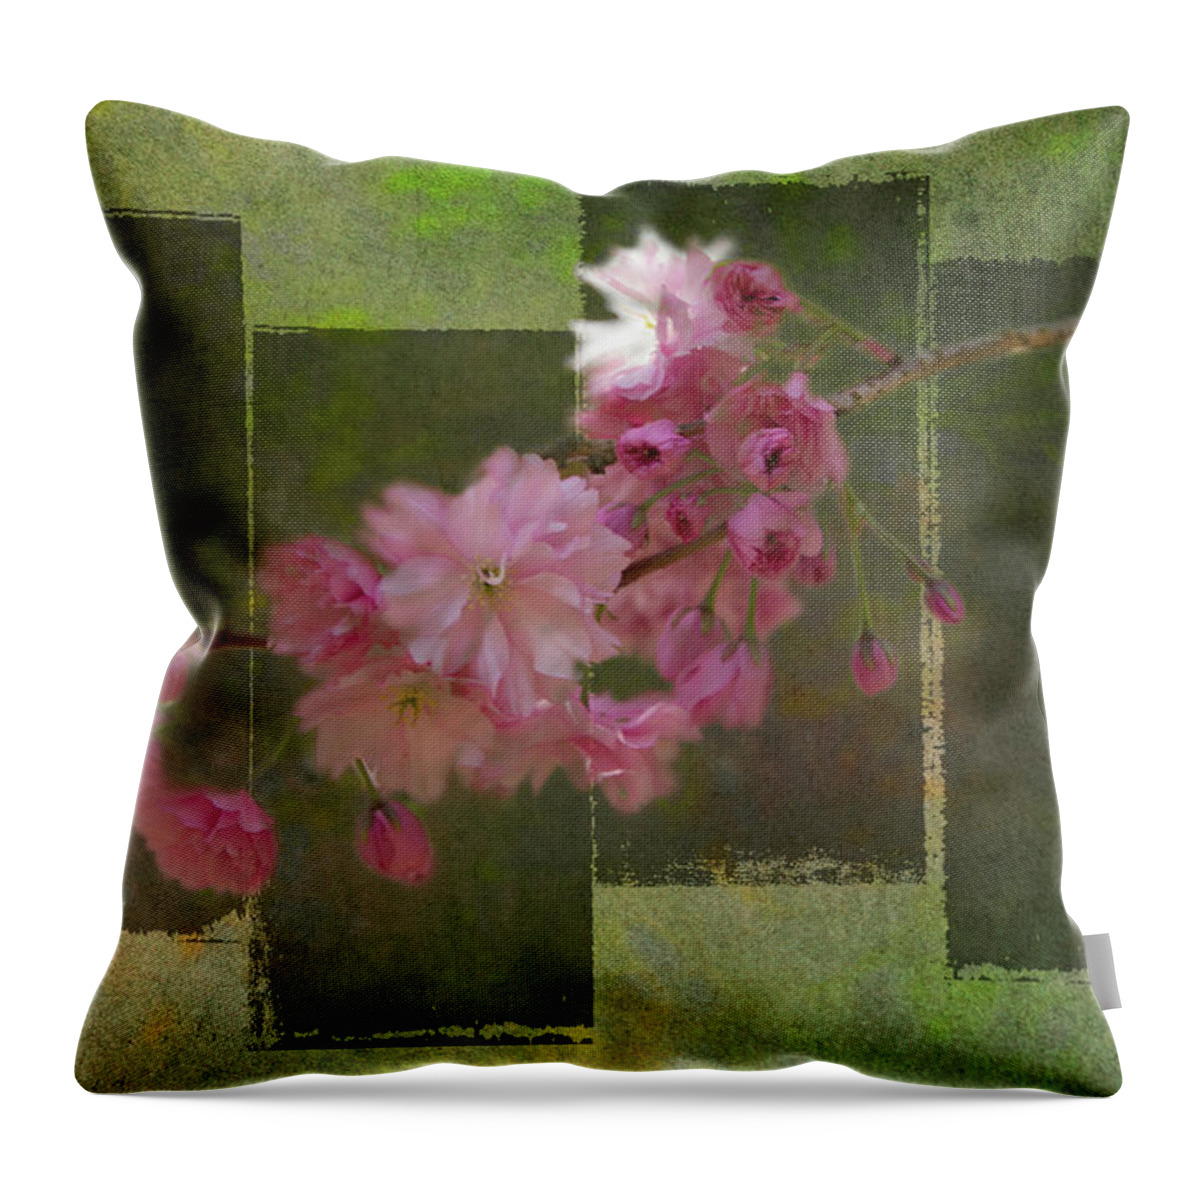 Flowers Throw Pillow featuring the photograph Romantic Blossoms 7 by Marilyn Wilson